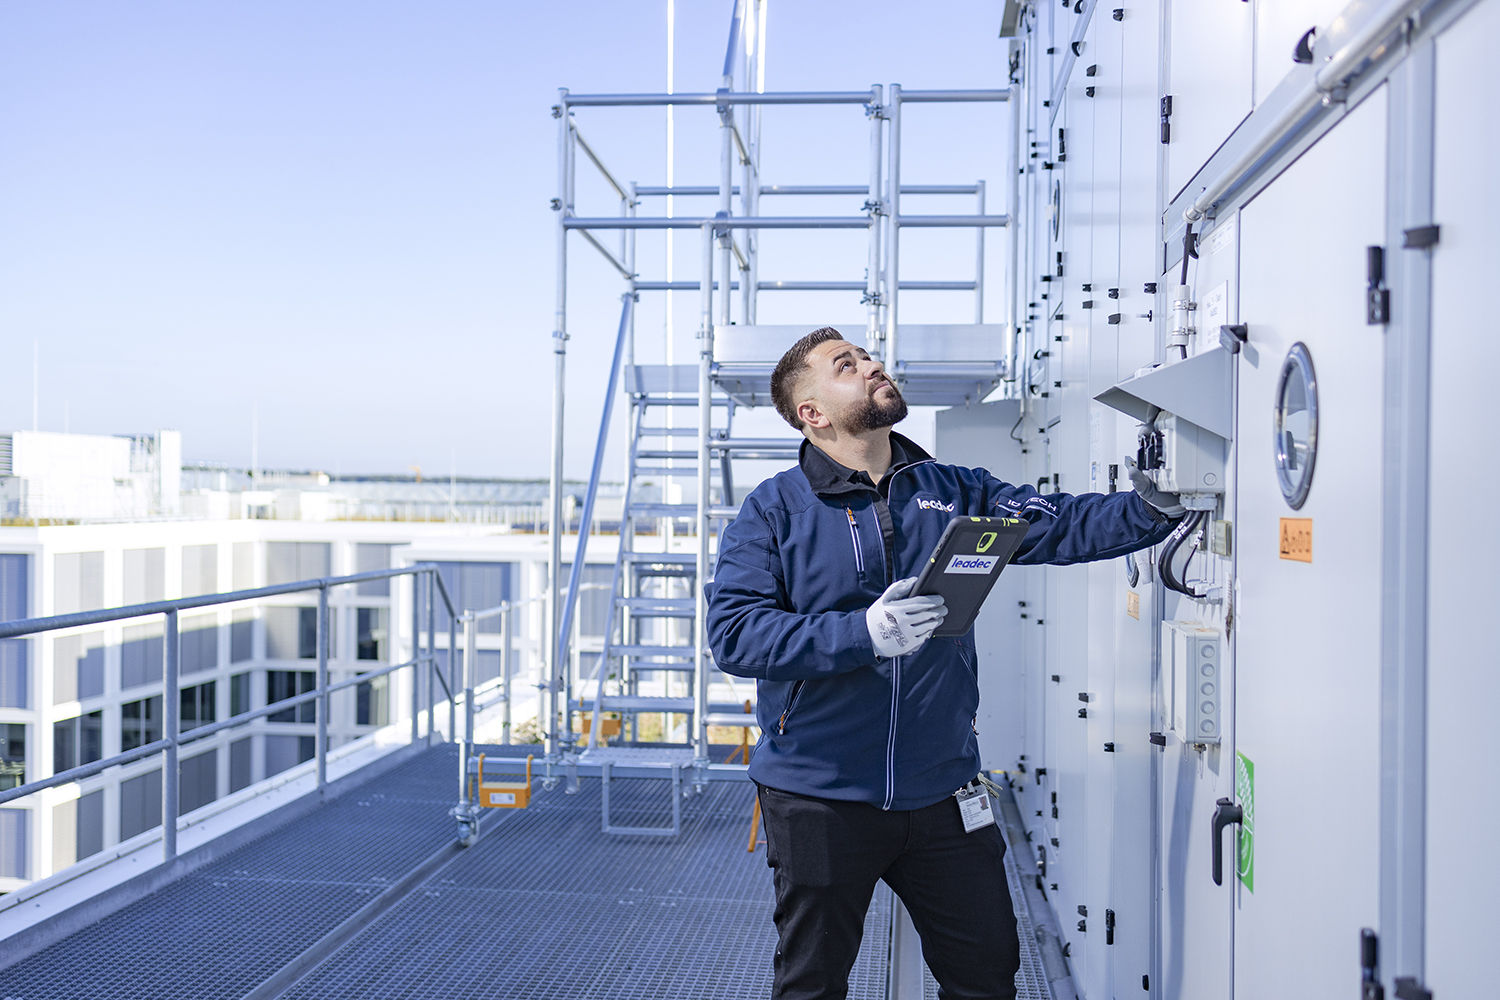 Leadec employee on a factory roof checks external installation of ventilation system.